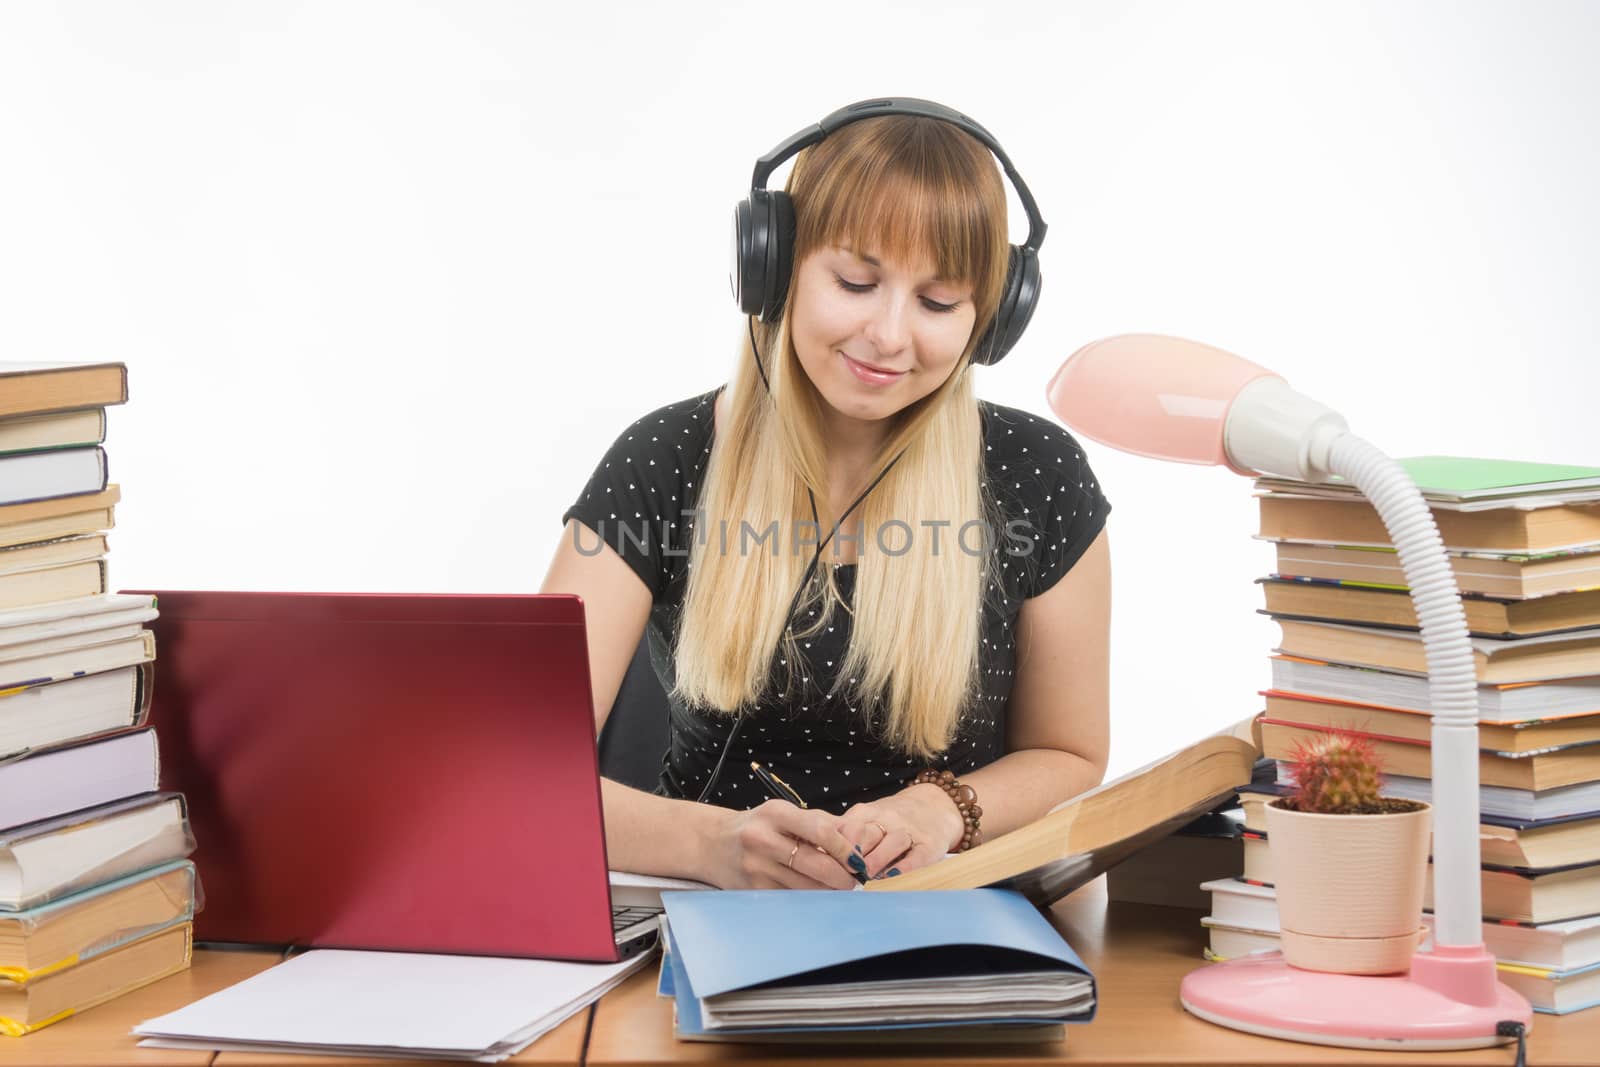 Student listening to music on headphones engaged in preparing for the exam